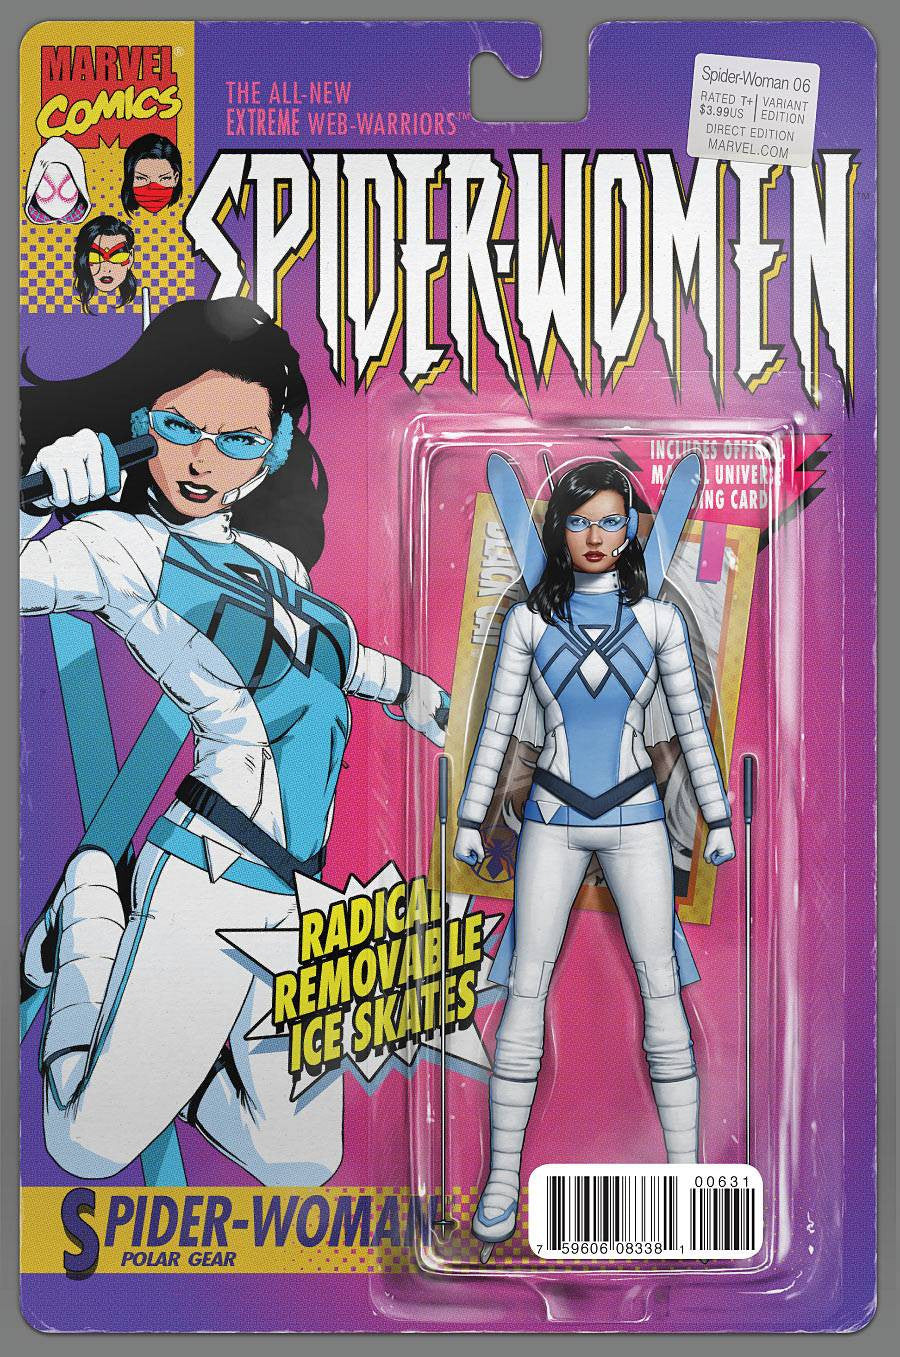 SPIDER-WOMAN #6 CHRISTOPHER ACTION FIGURE VAR SWO COVER